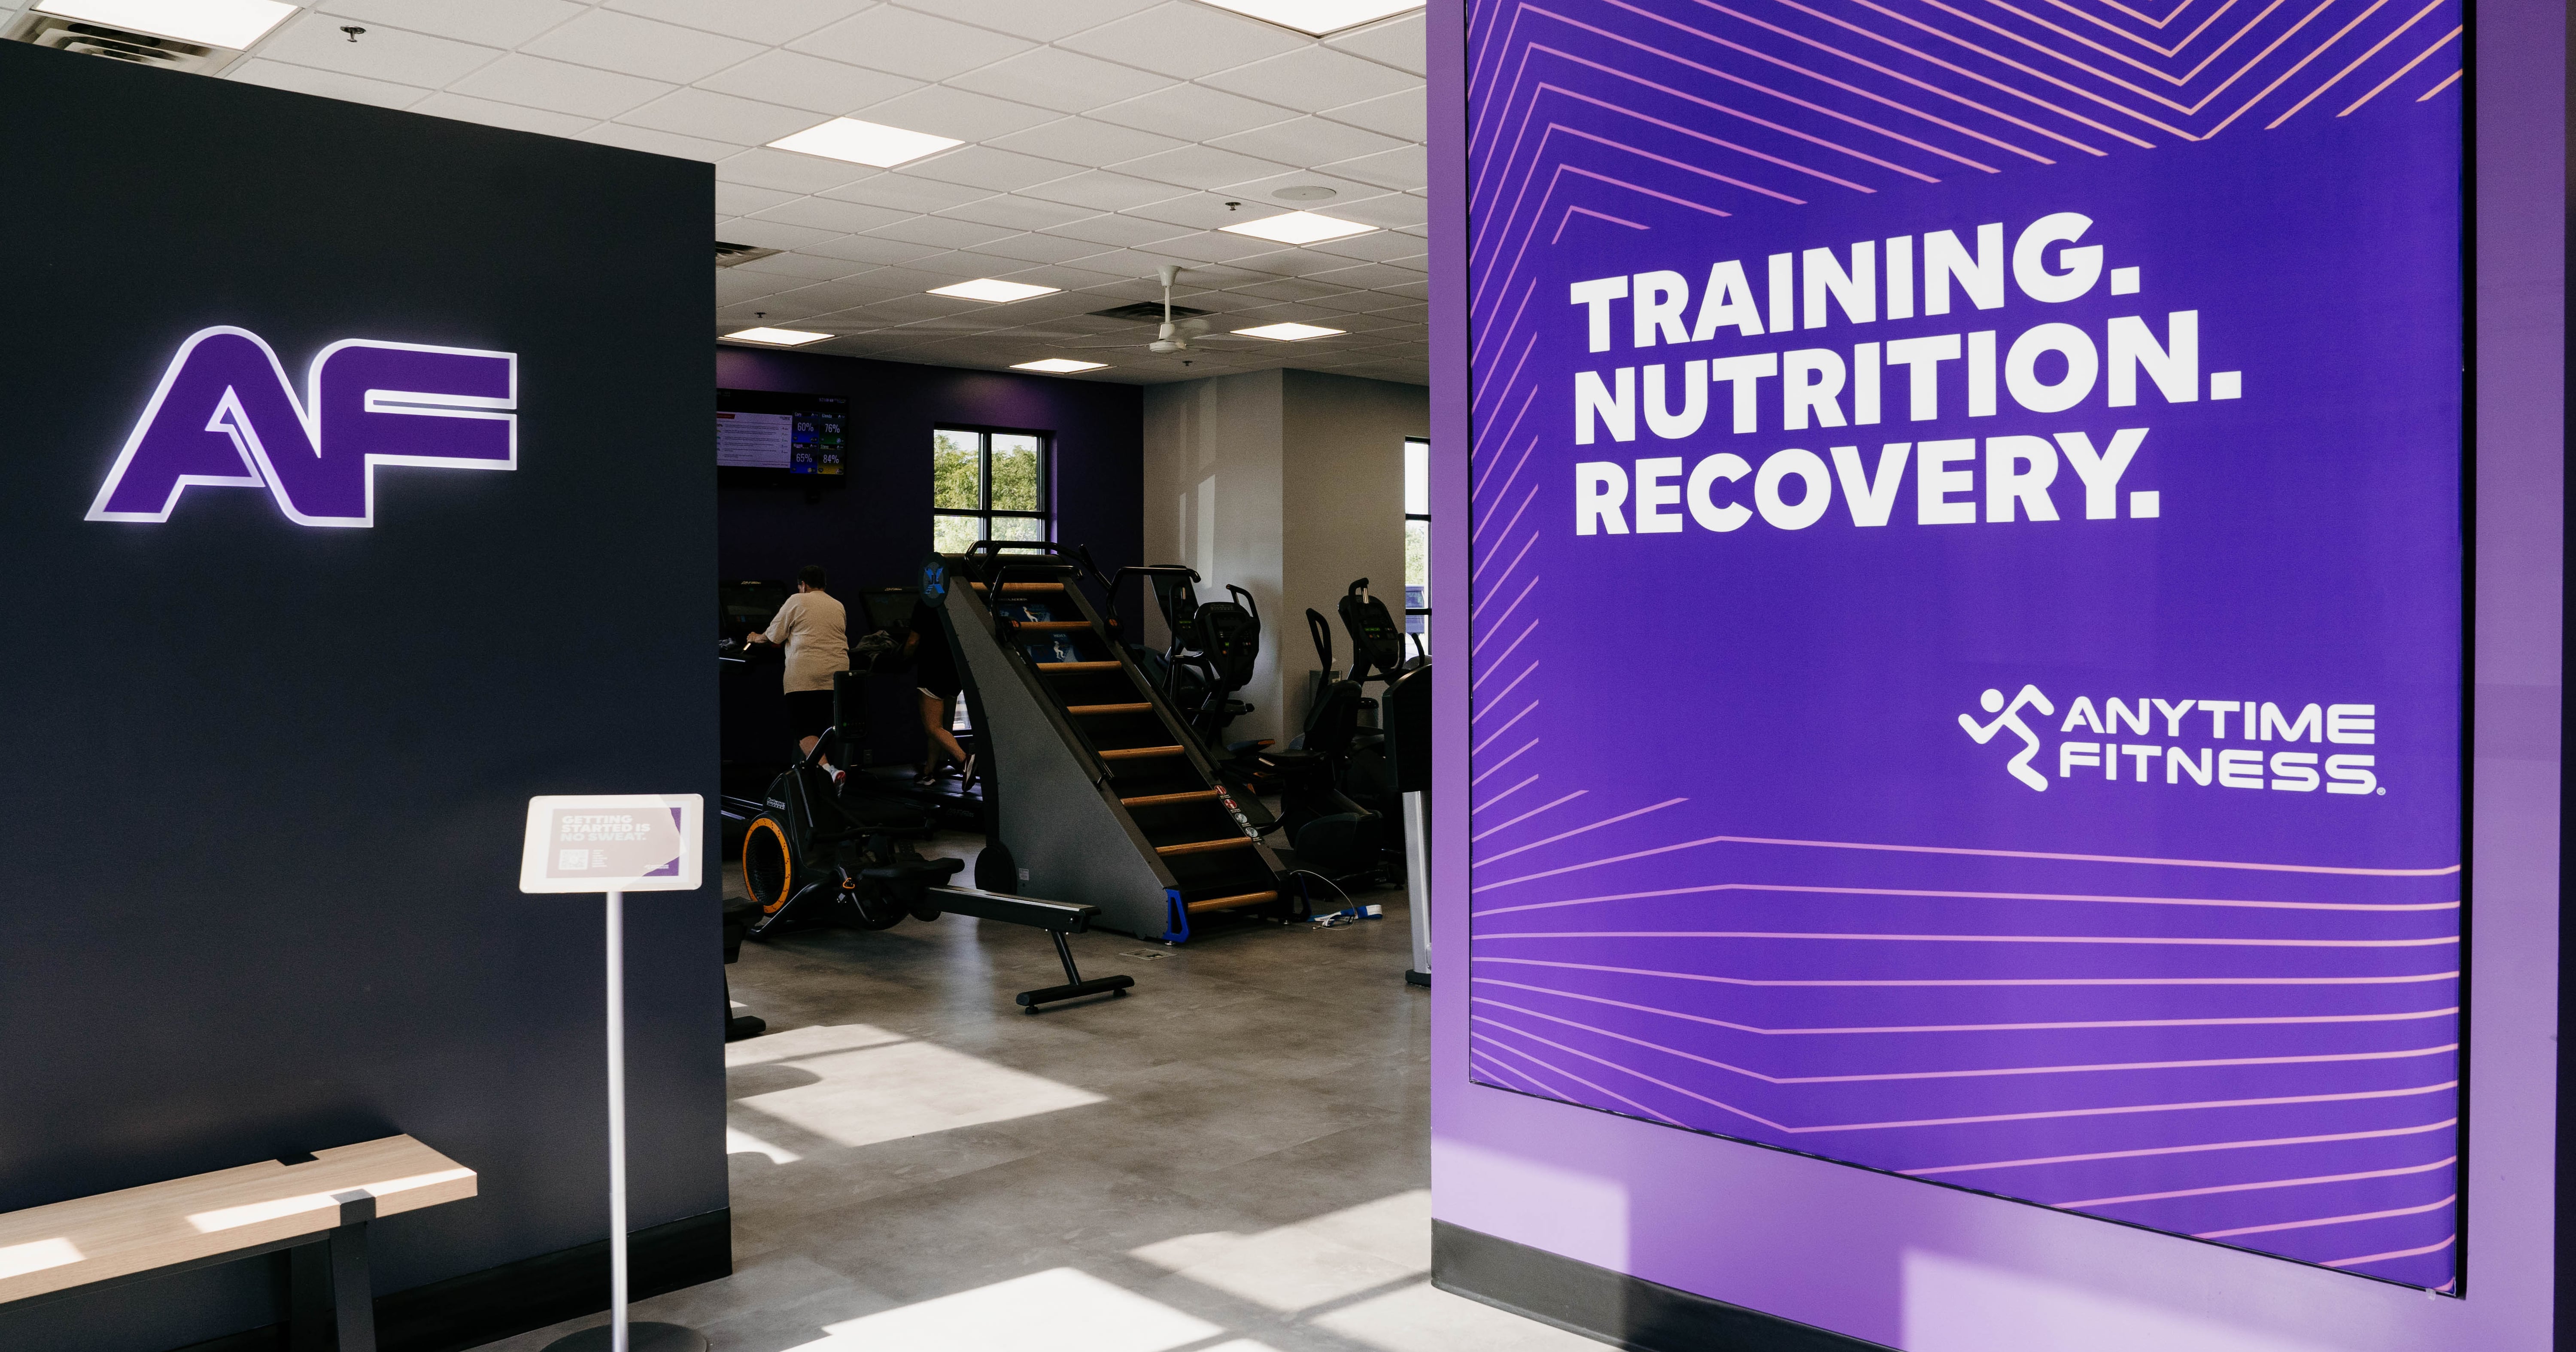 How Much Does Anytime Fitness Cost? Here's What to Know - 8ae3dd706682cbcc939fb6.44856975